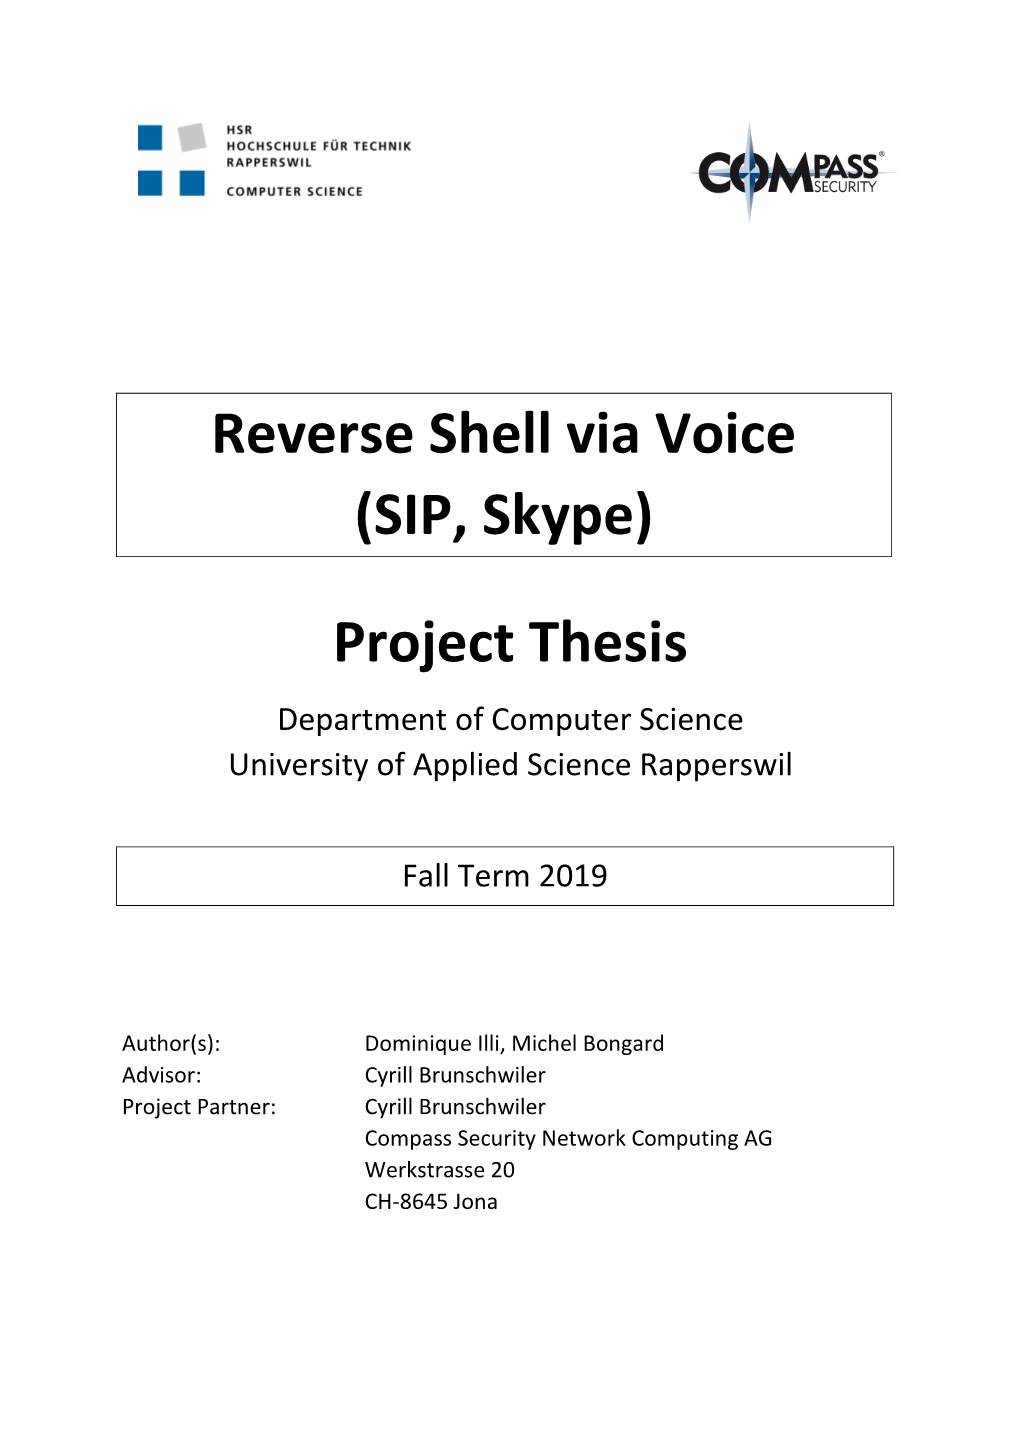 Reverse Shell Via Voice (SIP, Skype) Project Thesis